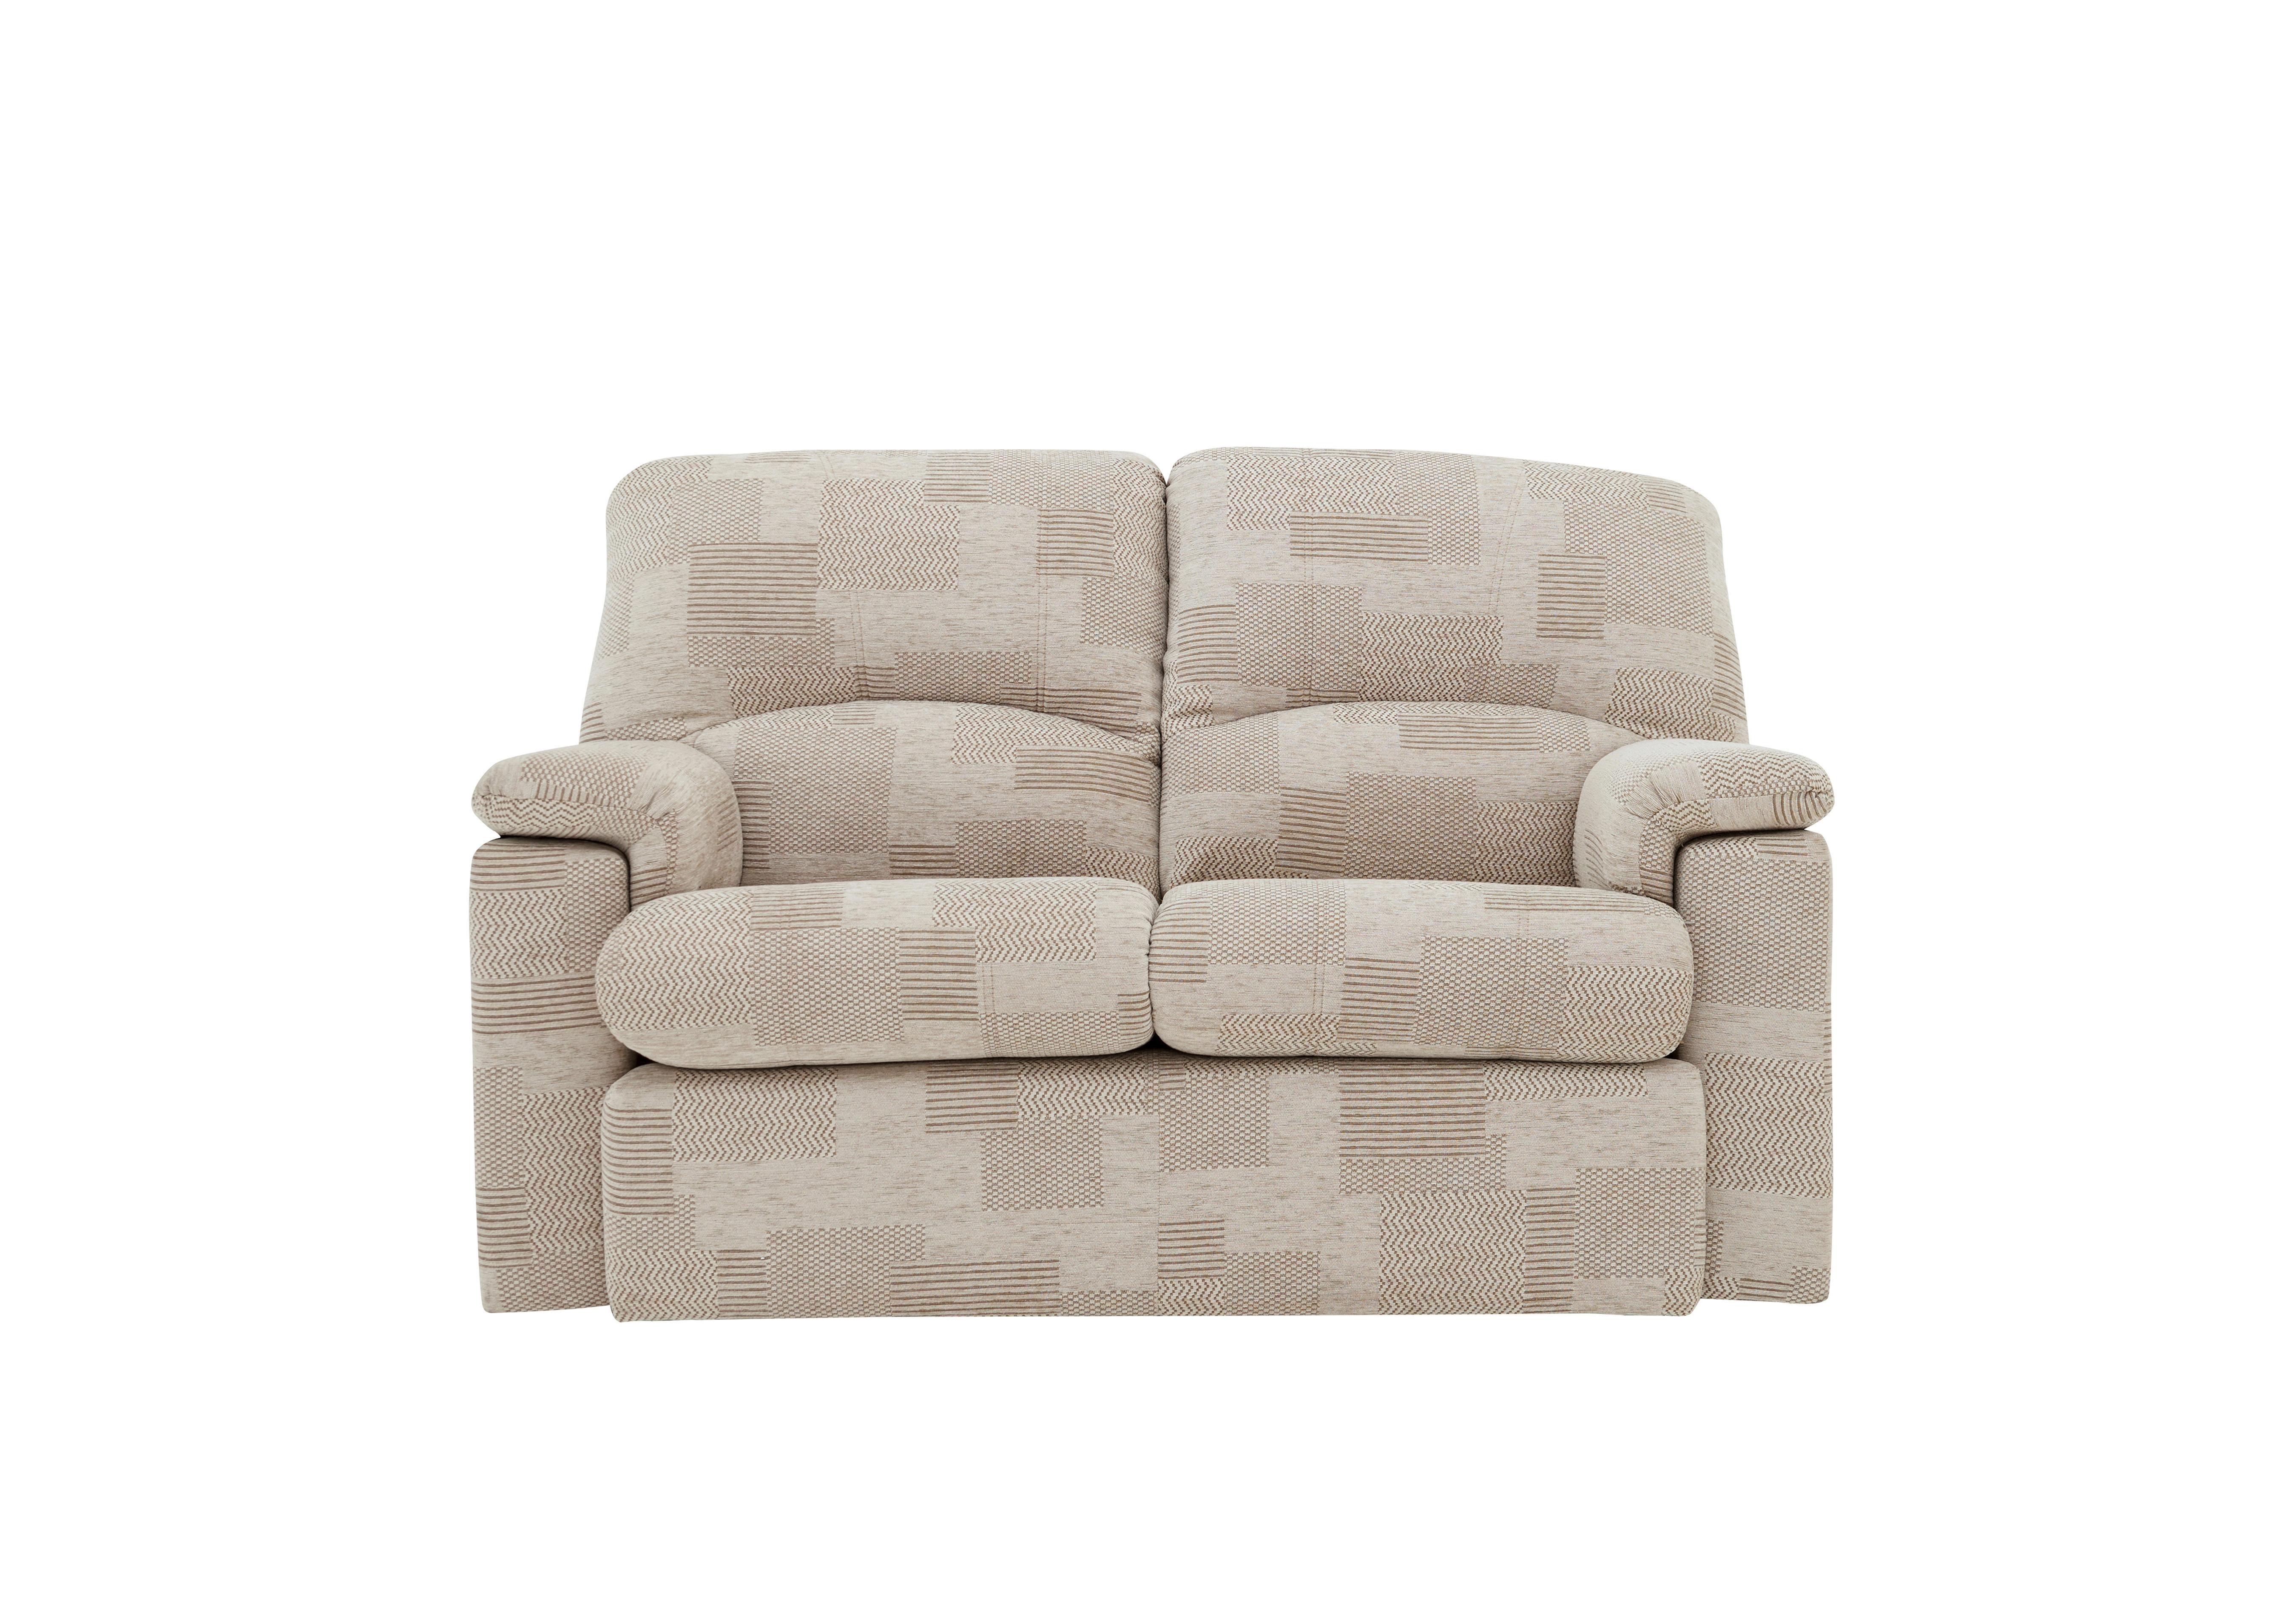 Chloe Small Fabric 2 Seater Sofa in C008 Checkers Putty on Furniture Village